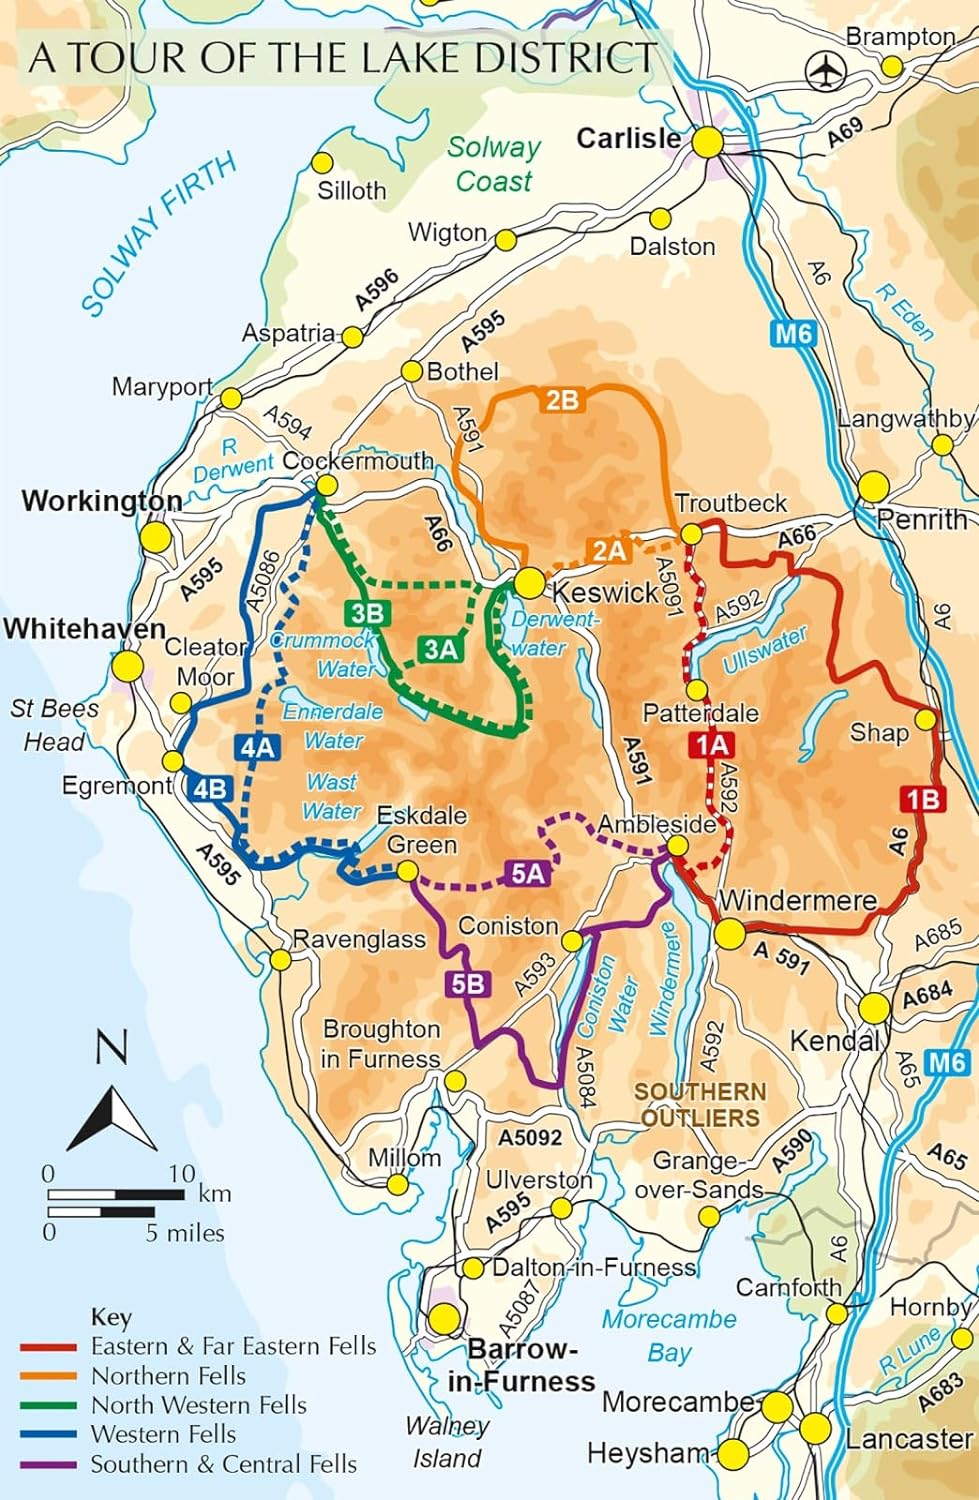 Cycling guide (in English) - Cycling in the Lake district | Cicerone